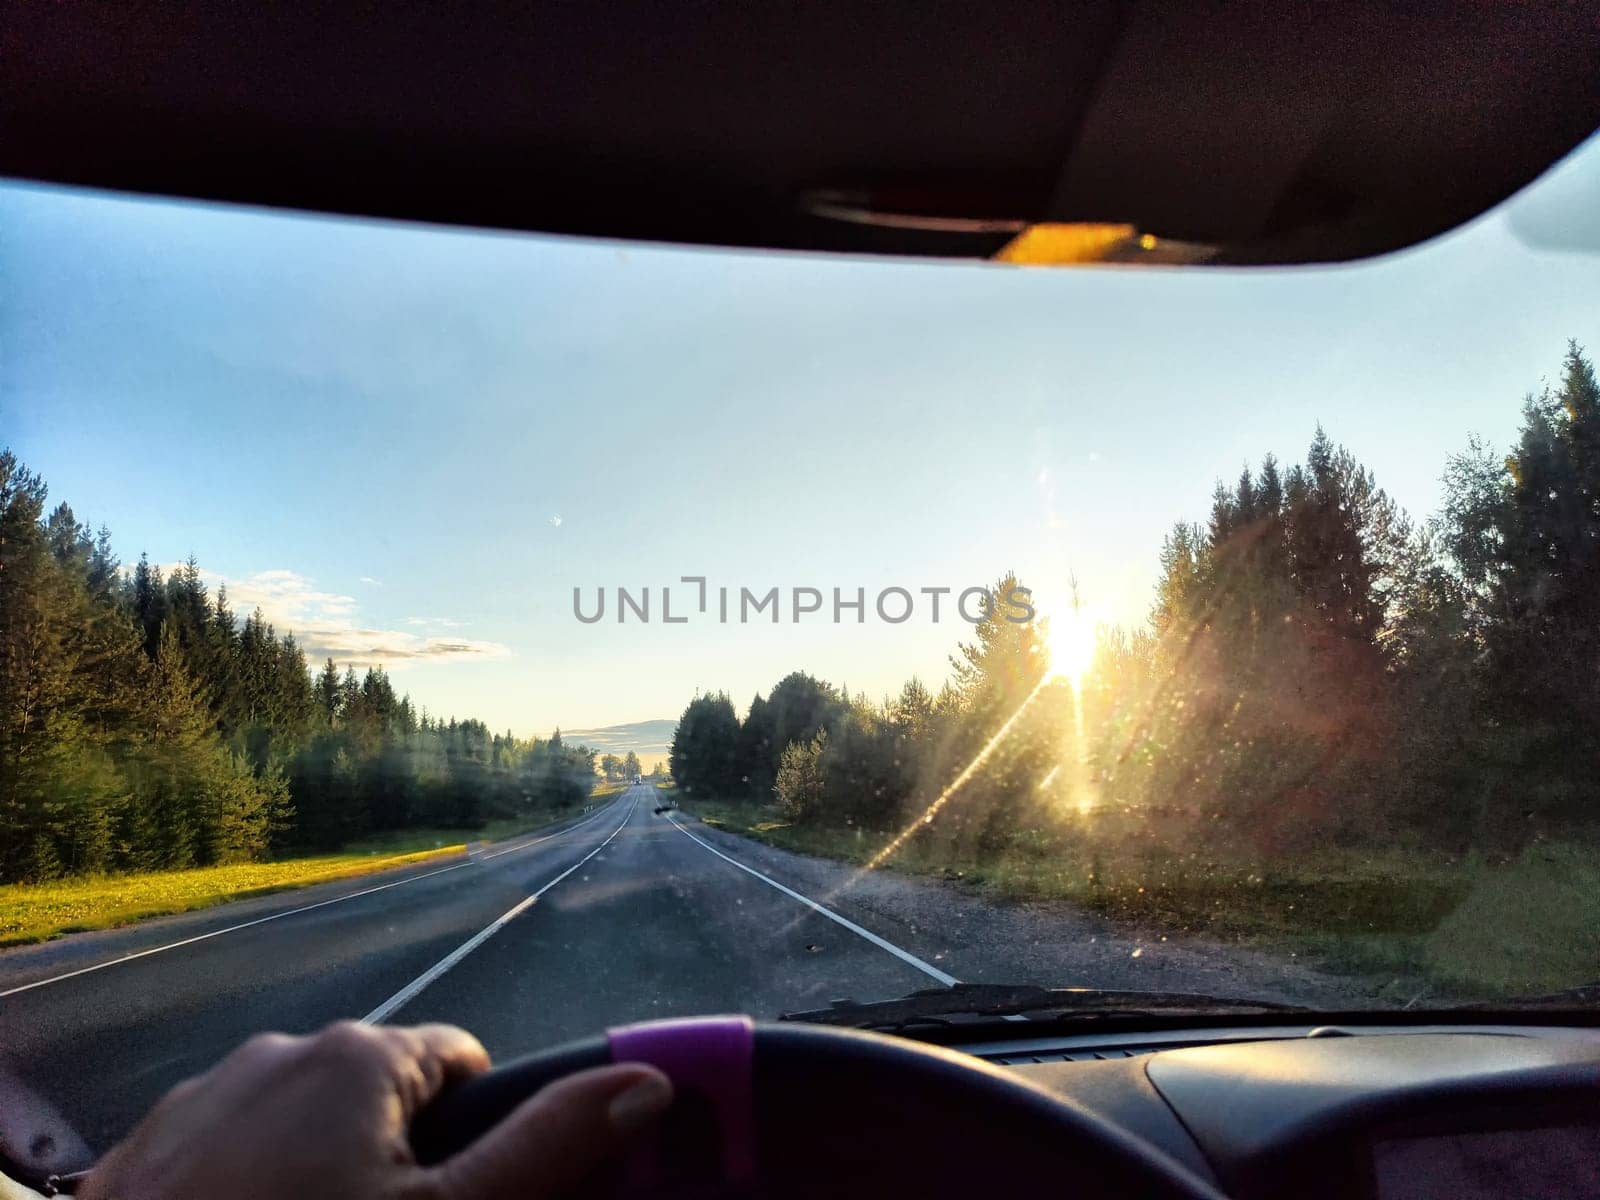 Car salon, windshield, hand of woman on steering wheel and landscape. View from seat of driver on nature at sunny day. Single trip of female traveler